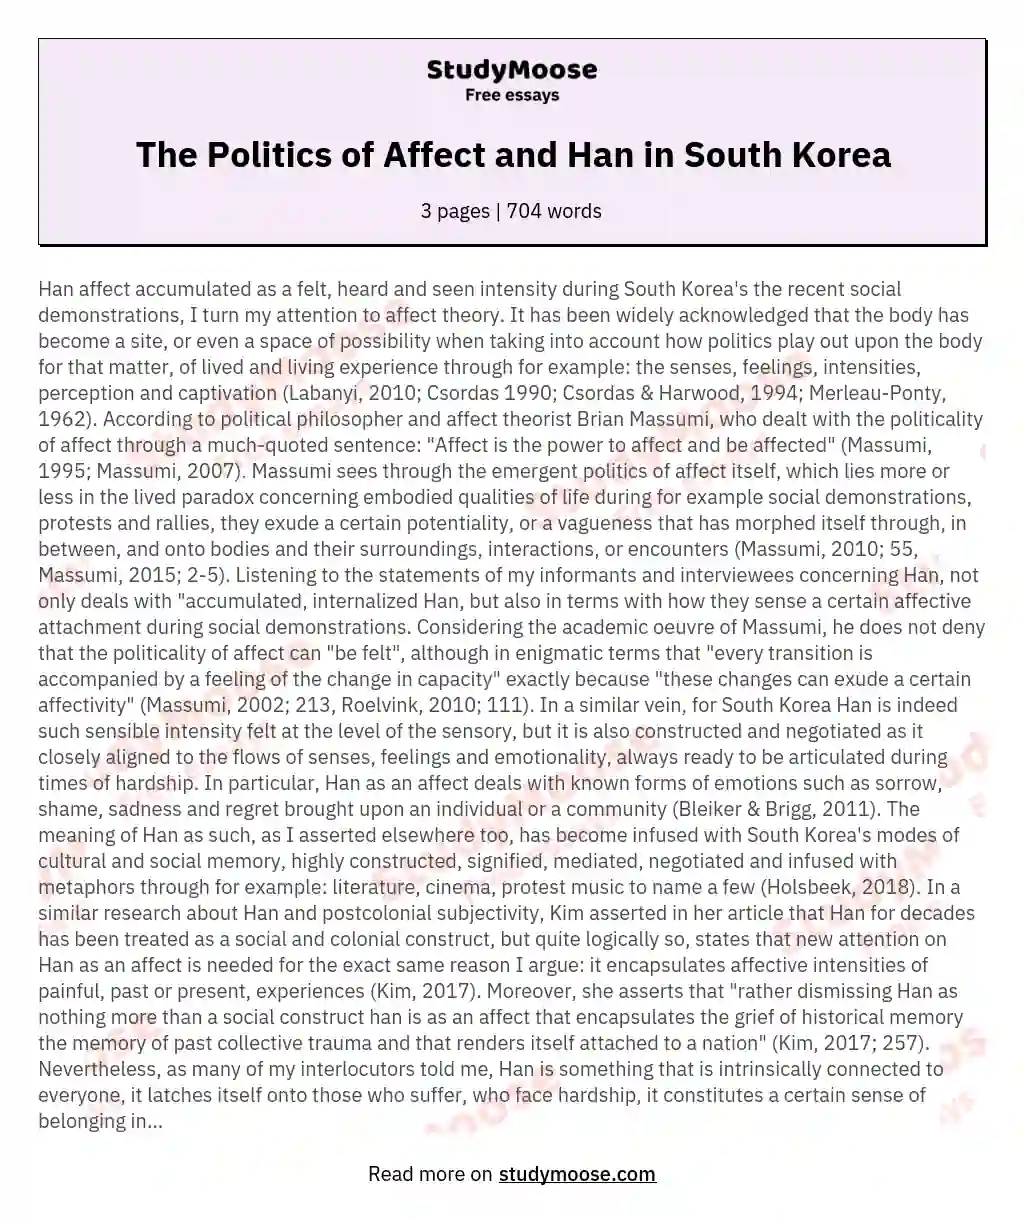 The Politics of Affect and Han in South Korea essay